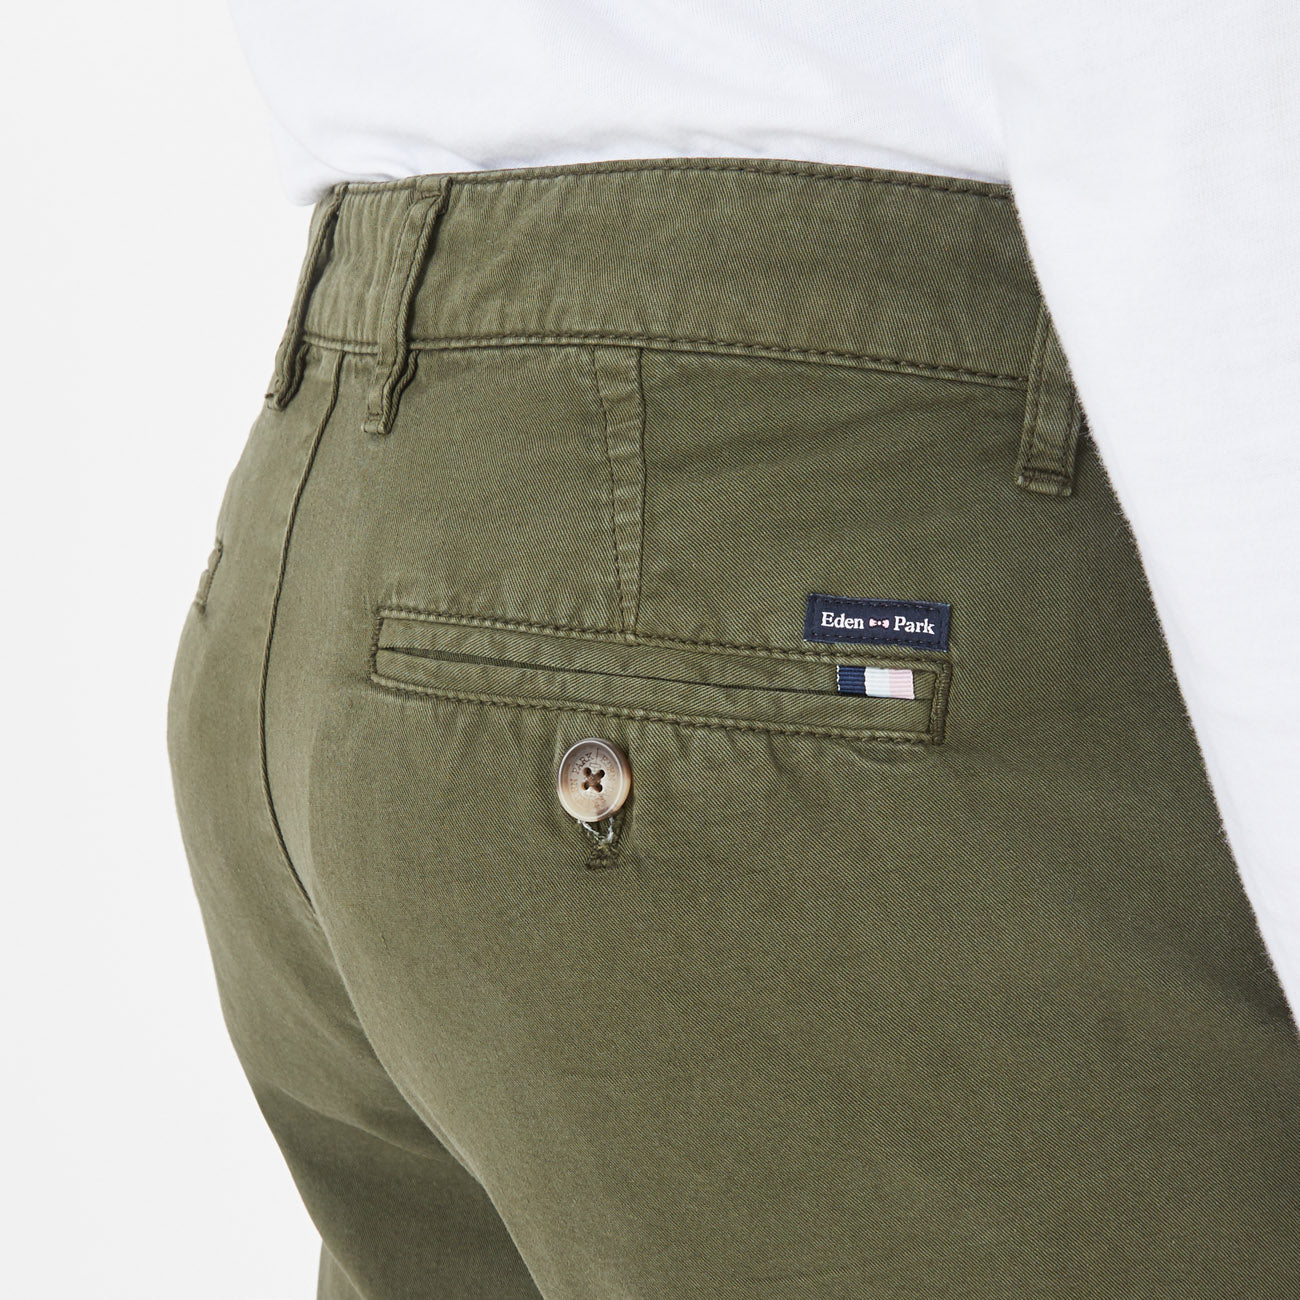  Eden Park Dark Green Chino Bermuda Shorts made from cotton with practical pockets available at StylishGuy Menswear Dublin